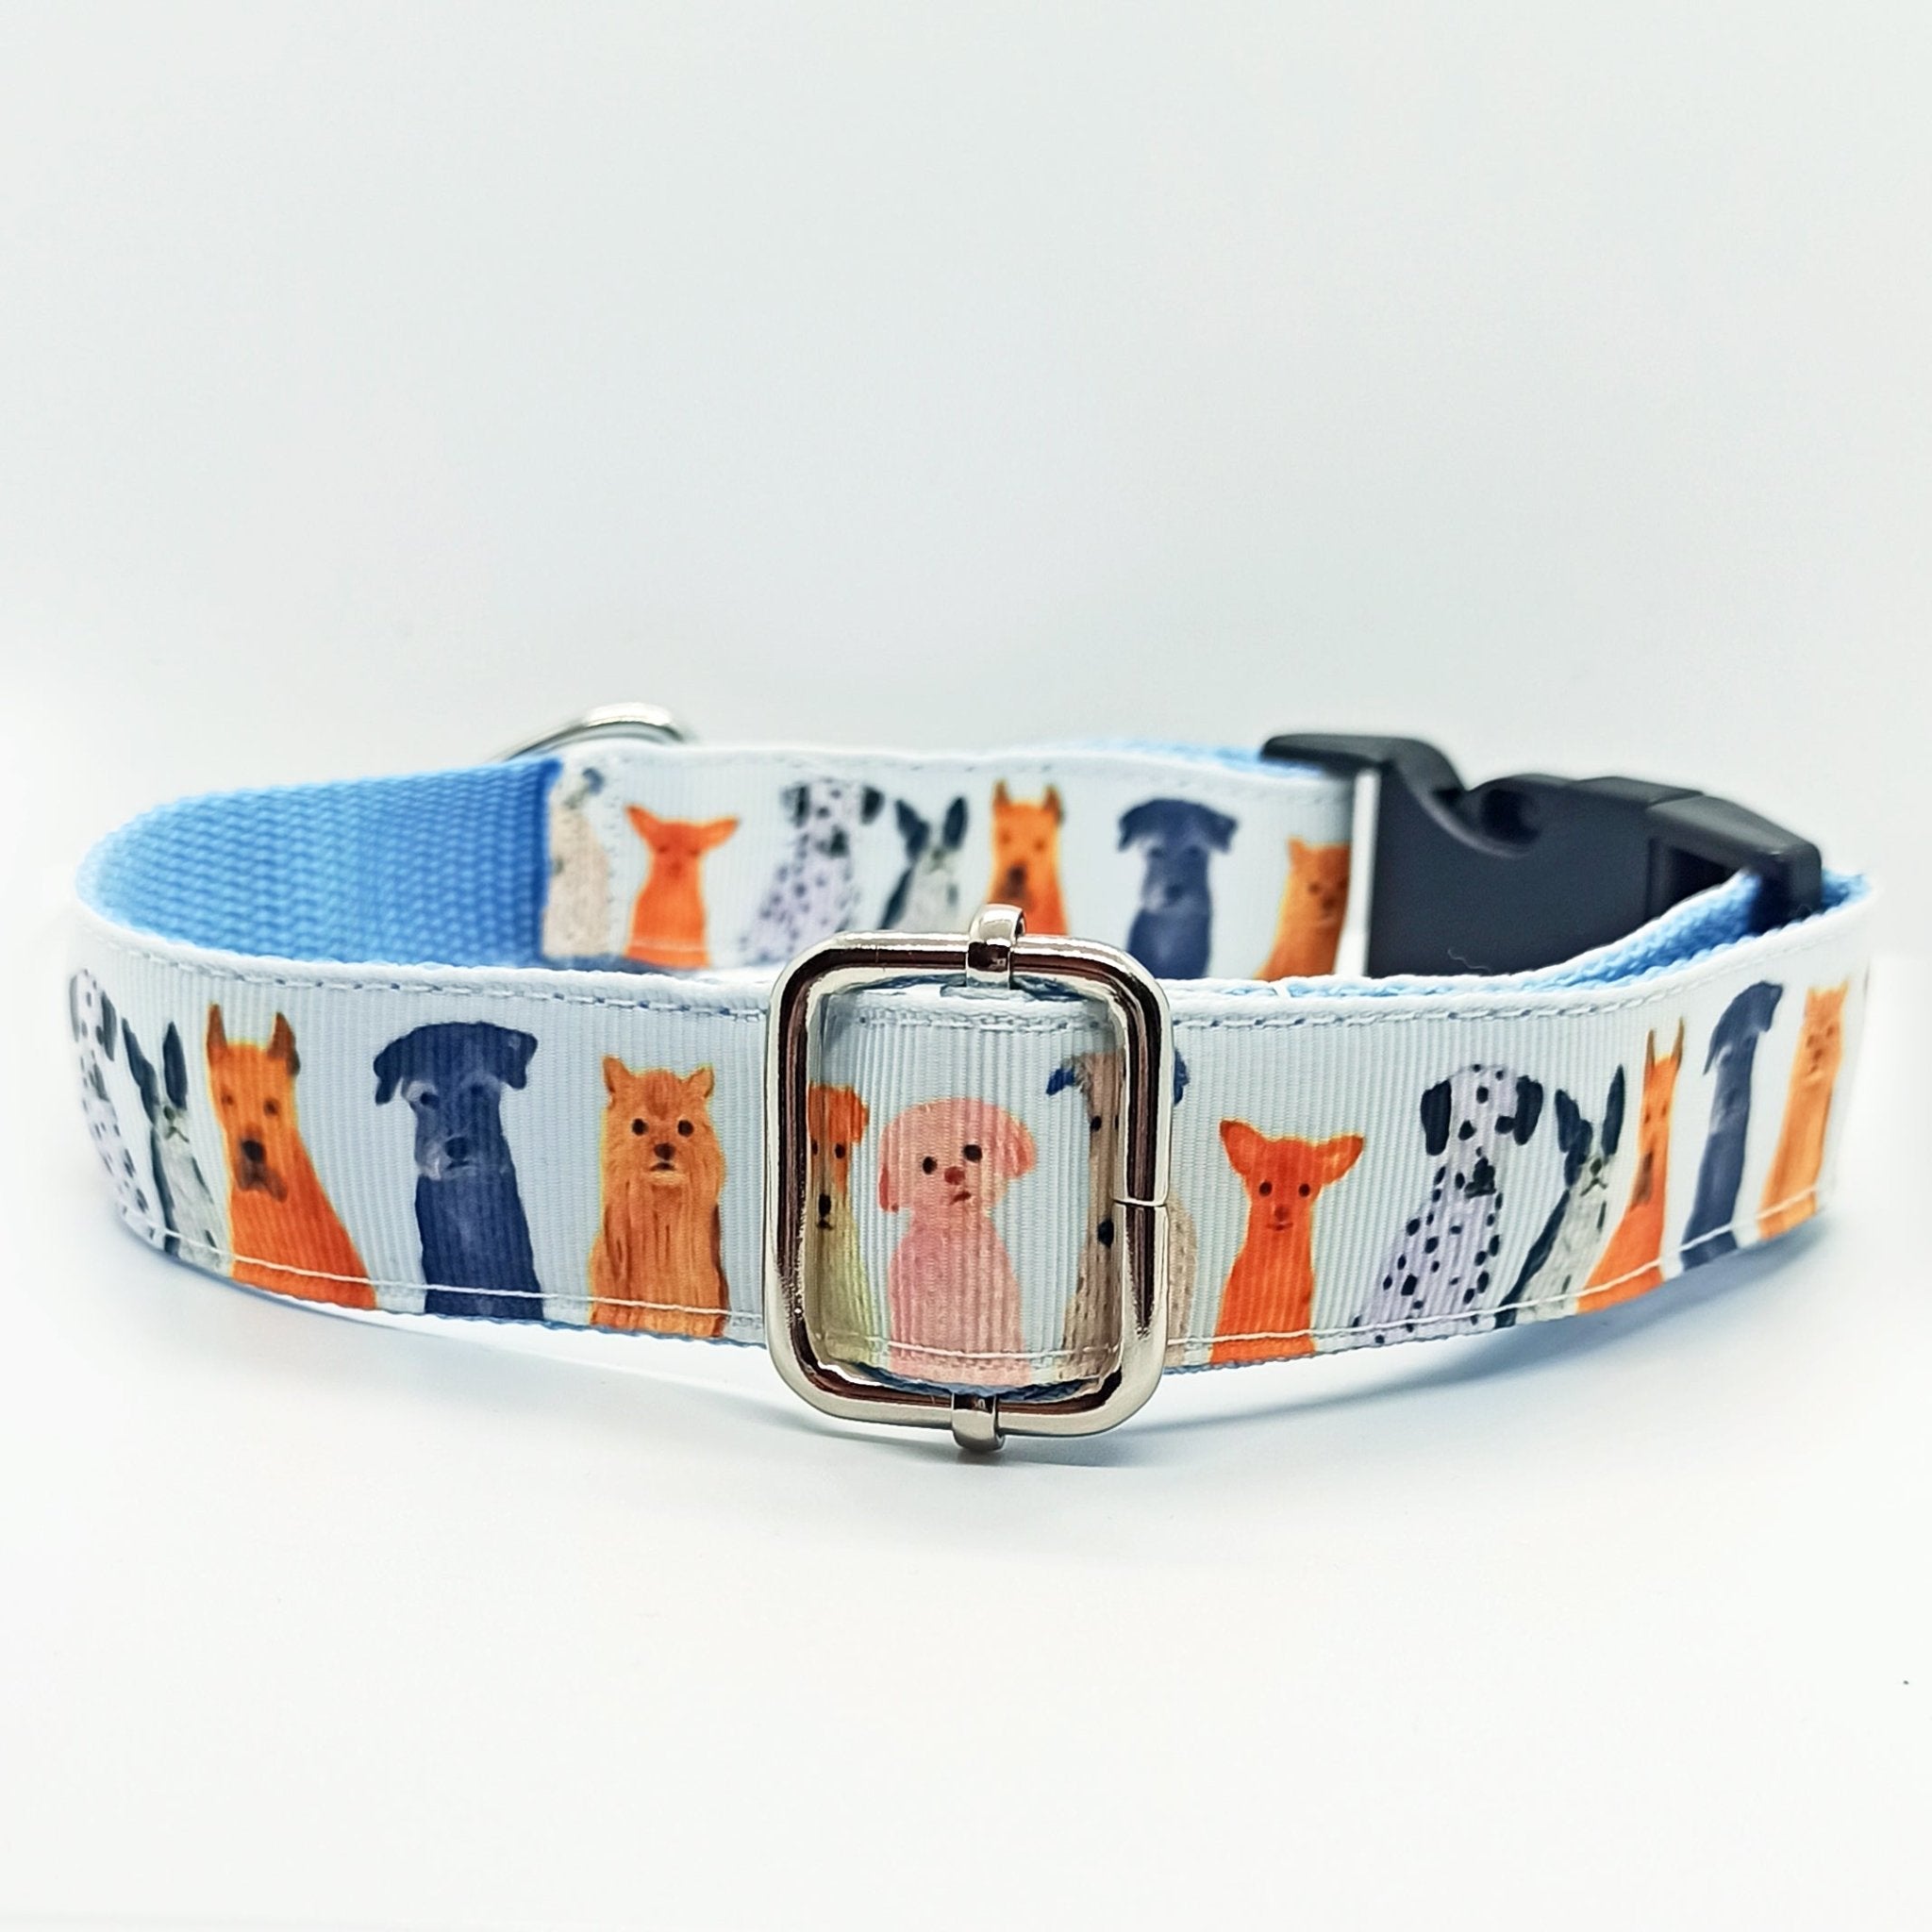 Cute Dogs, Dog Friends, Dog Breed Dog Collar - XS-L sizes with custom matching pet tag - Adventures of Rubi